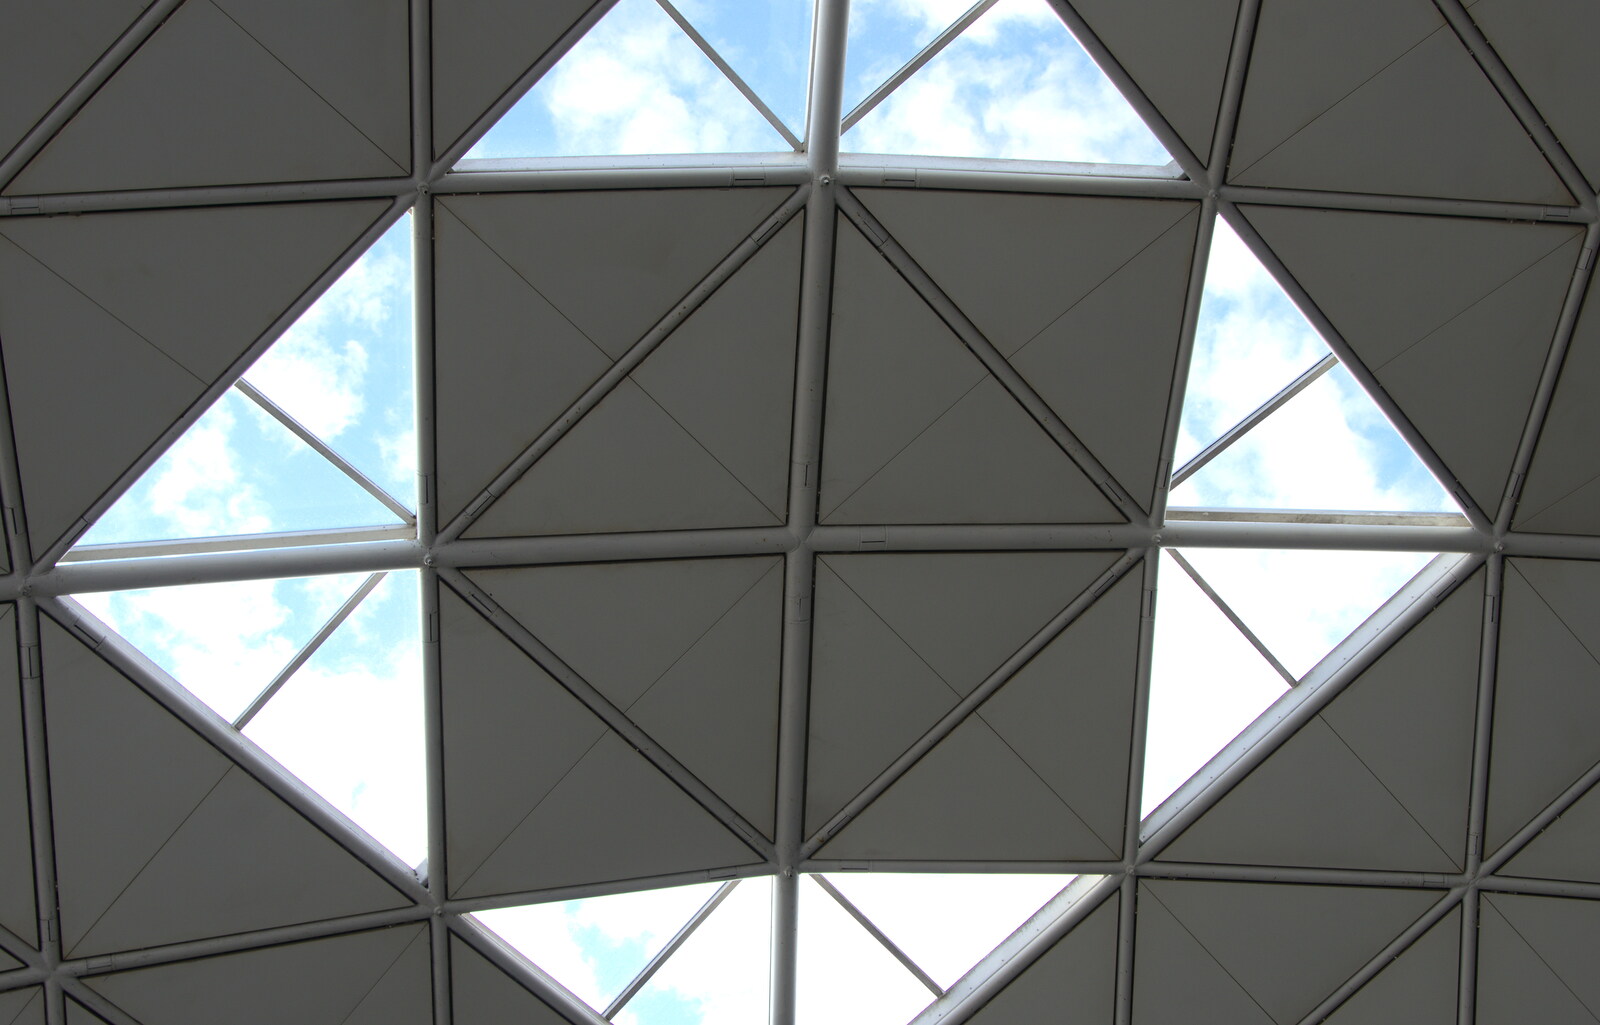 A Norman Foster skylight from A Night Out in Dublin, County Dublin, Ireland - 9th August 2014